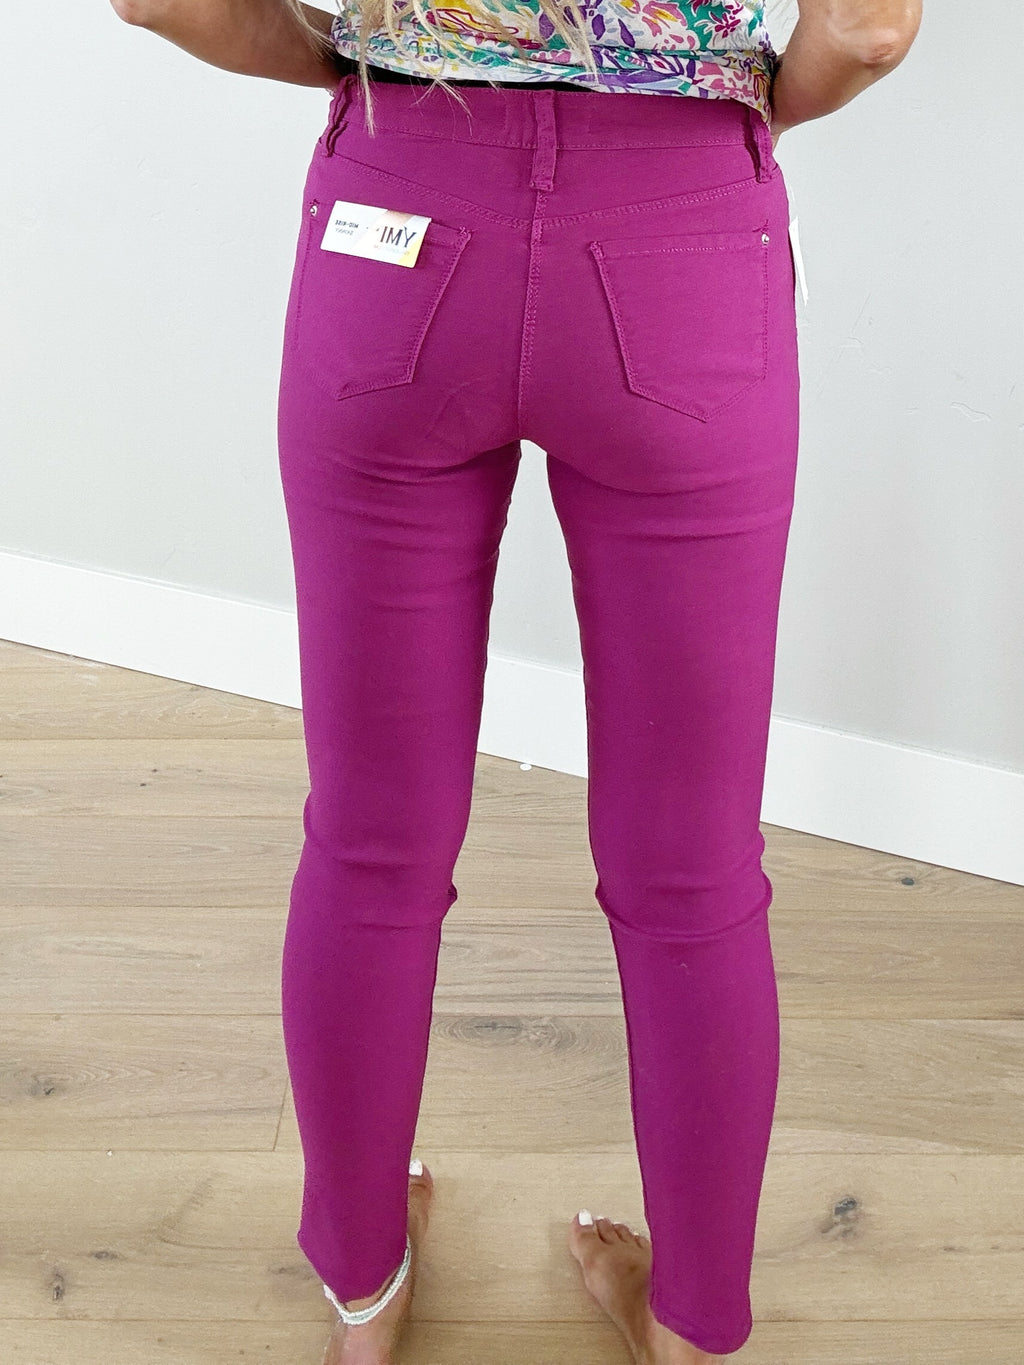 YMI Junior Mid-Rise Skinny Jeans in Berry Rose